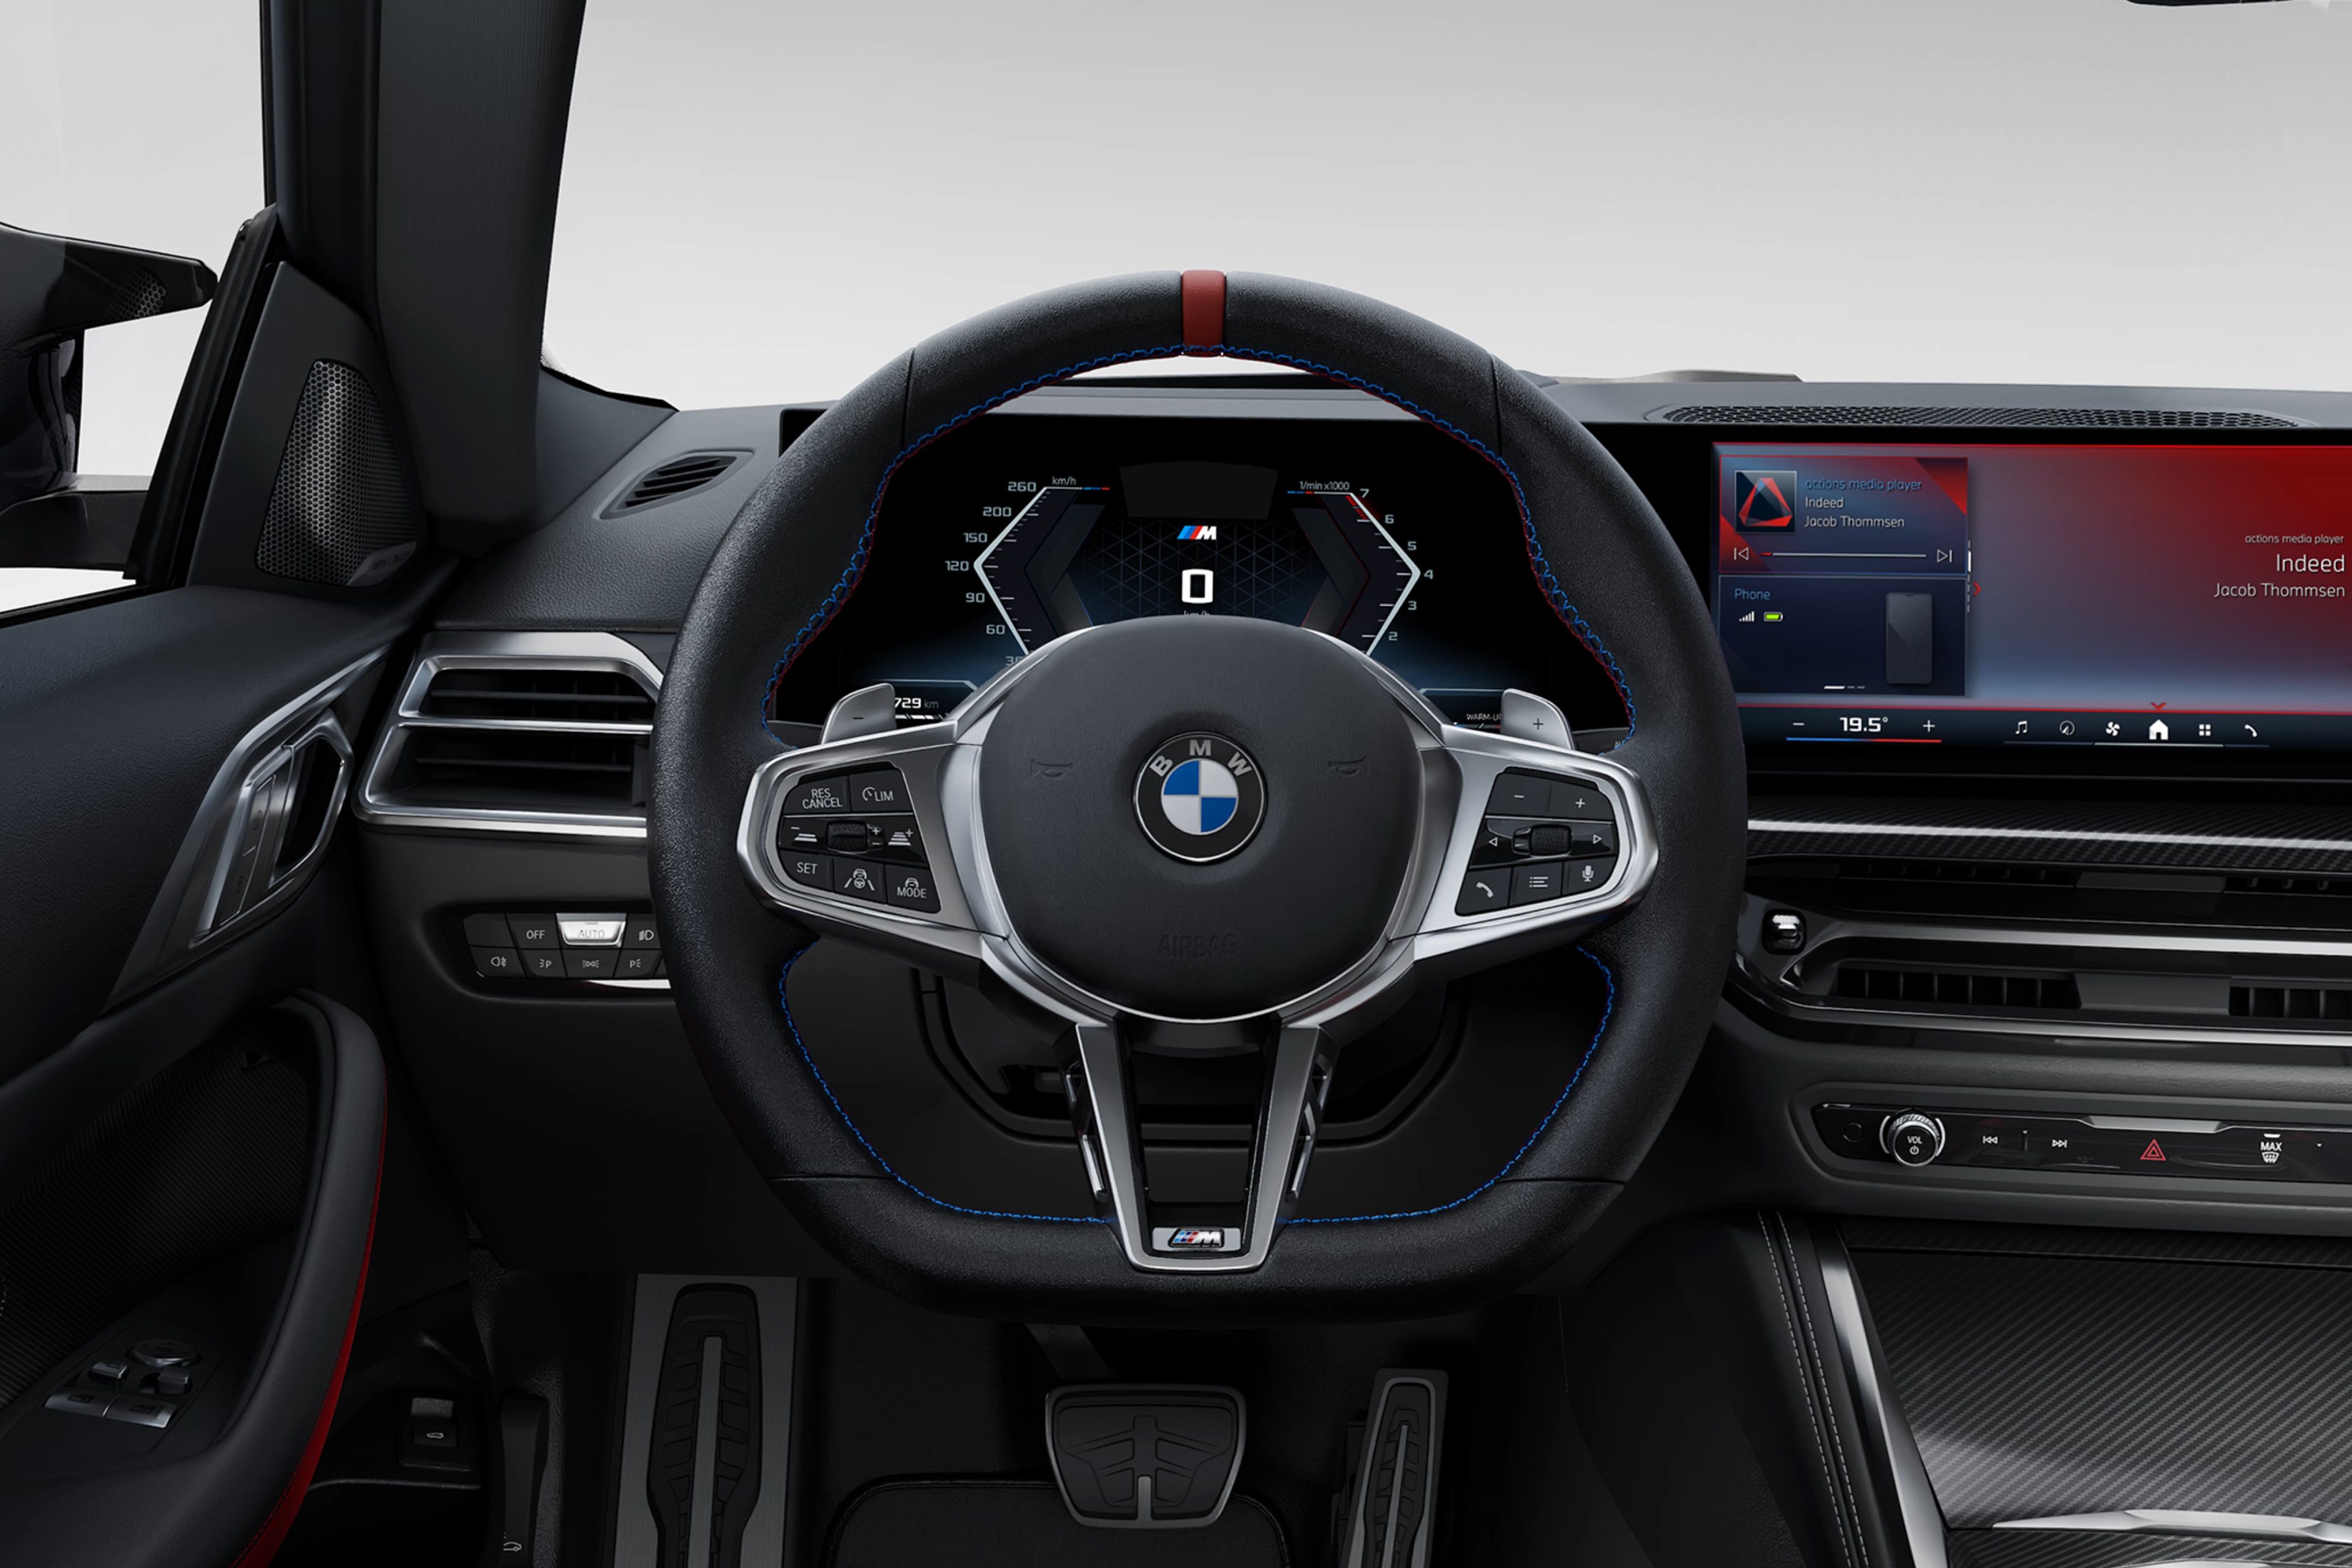 New M Leather Steering Wheel Design on the BMW M440i Coupe